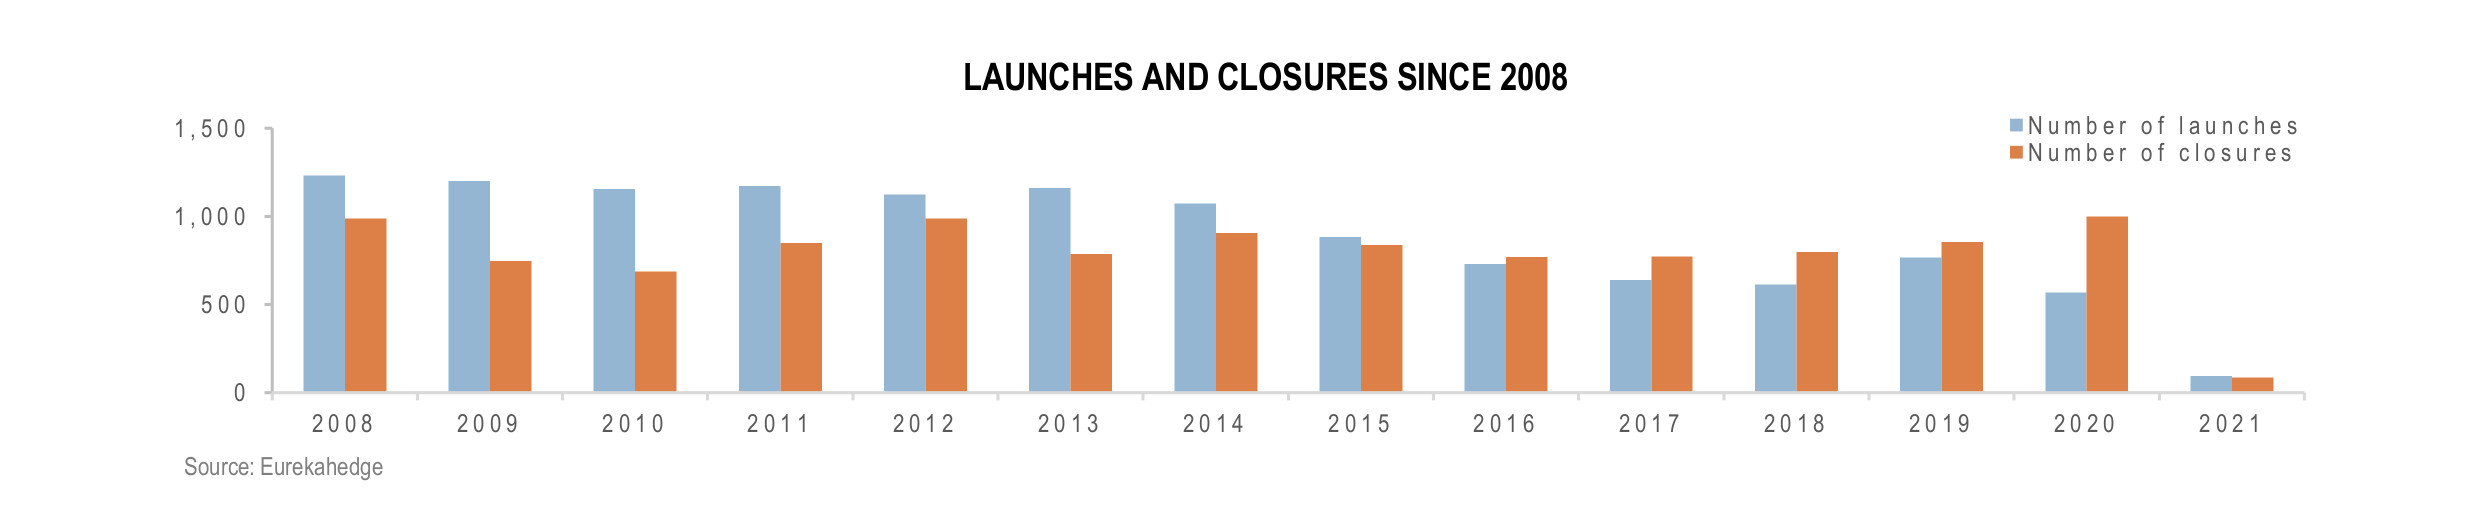 Global Hedge Funds Infographic April 2021 - Launches and Closures